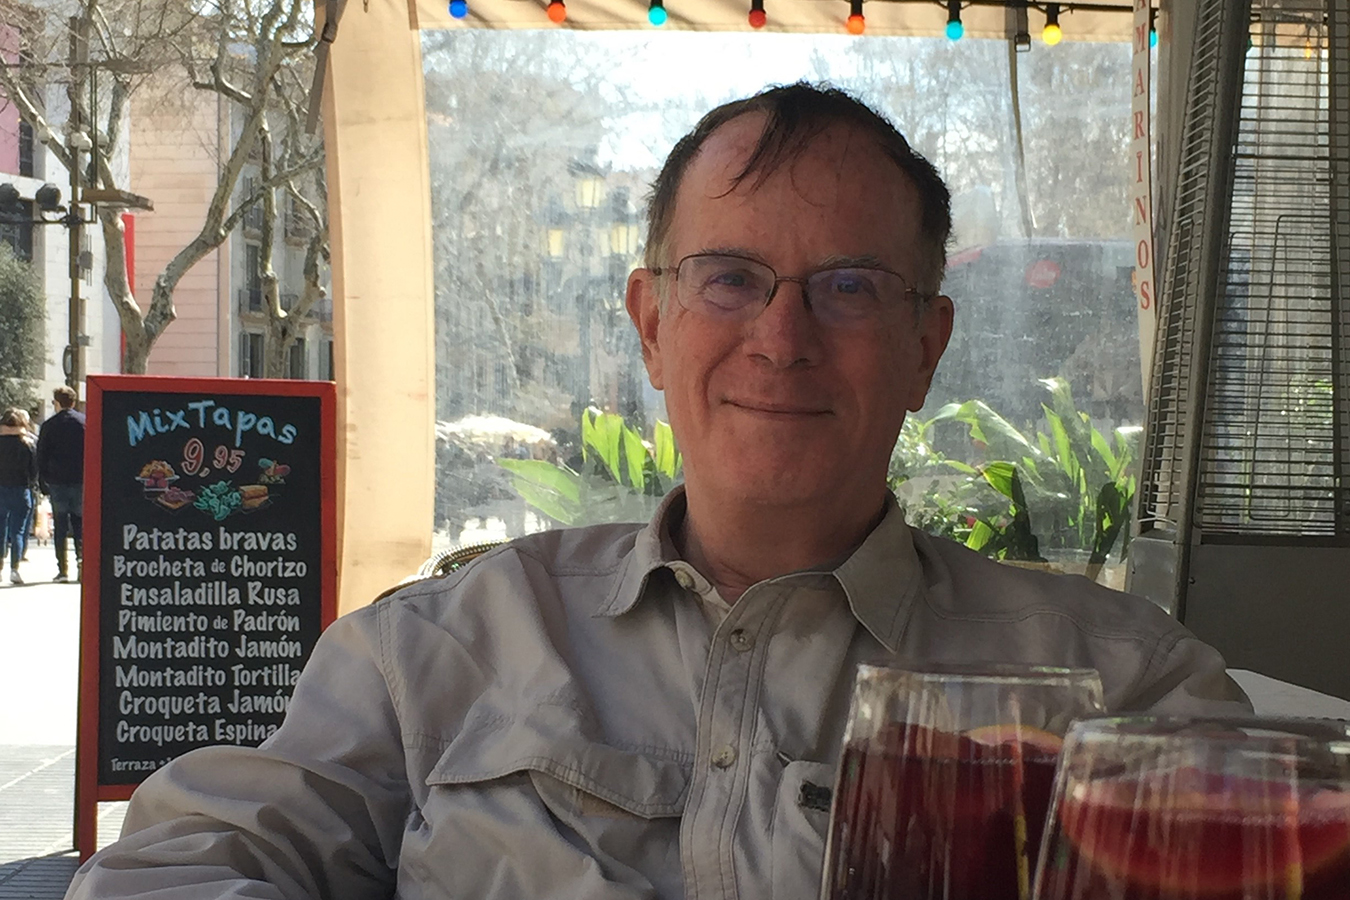 PHOTO: Peter Sperry, pictured here on a trip to Barcelona, is expecting to move through later life without the safety net of a spouse or child to care for him as he ages.